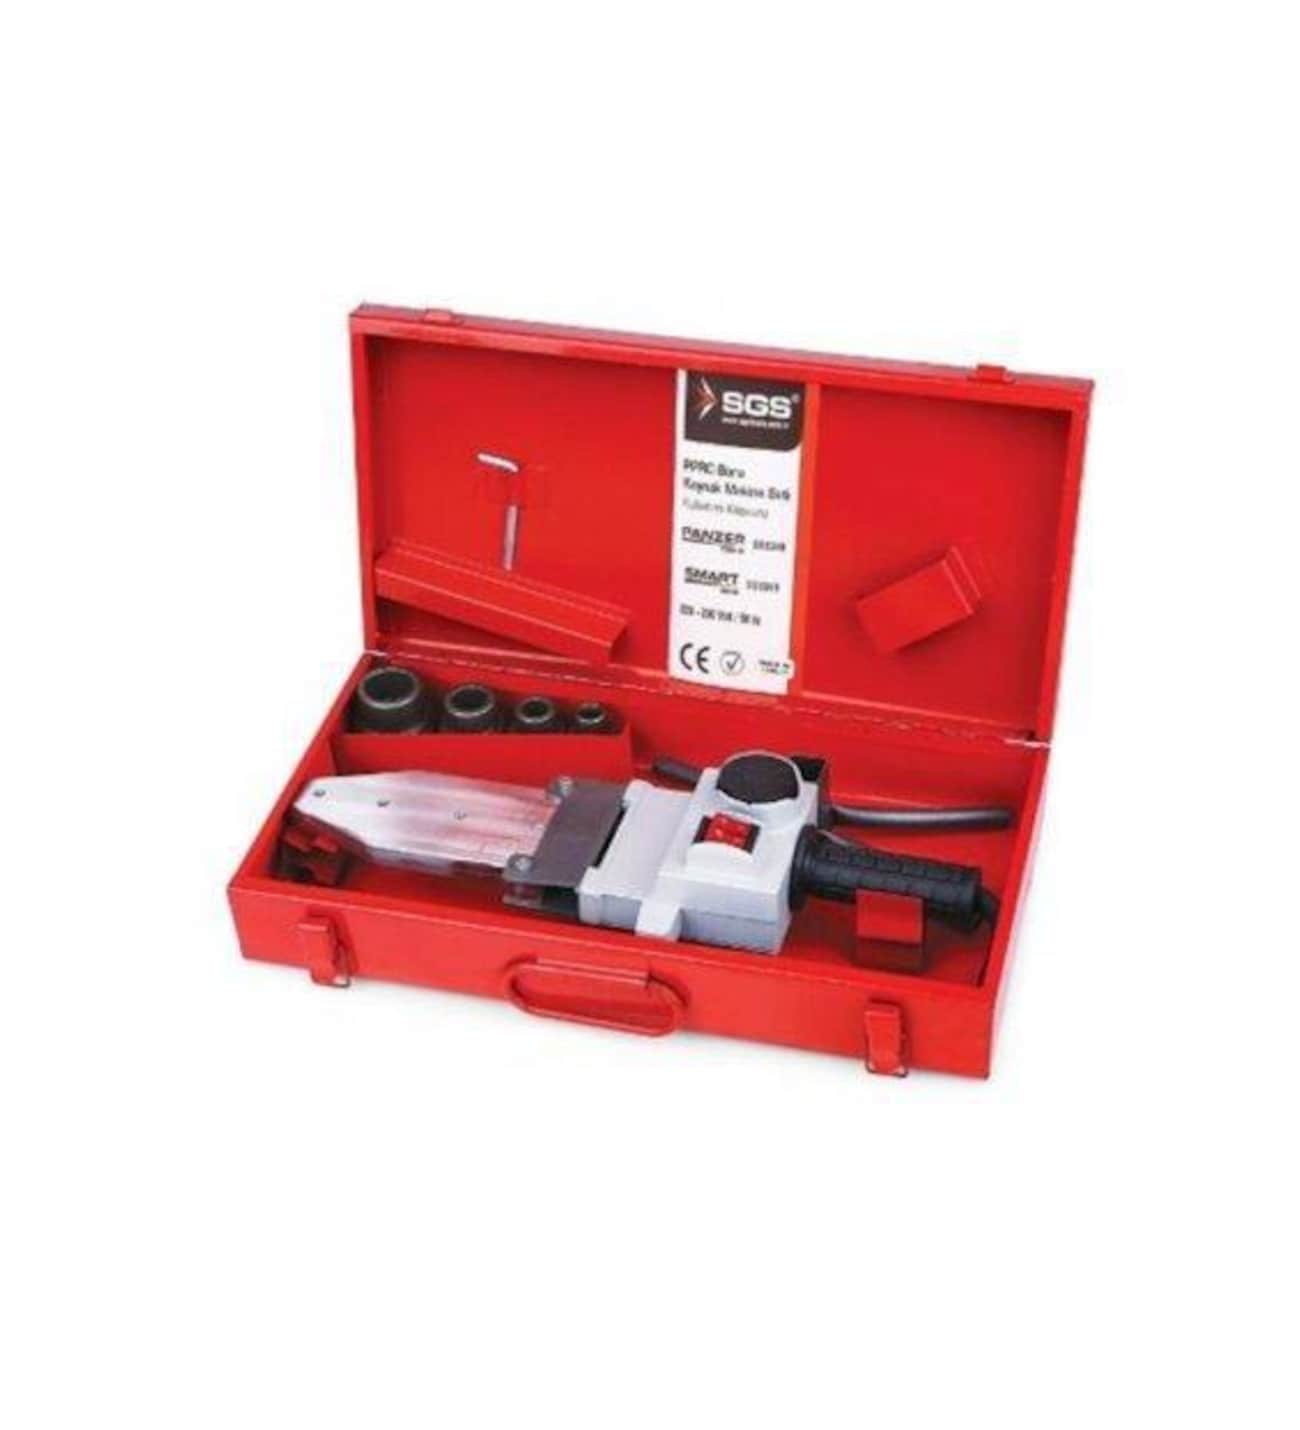 SGS PPR Welding Machine Panzer 1500W - SGS348 for PPR Pipes | Supply Master | Accra, Ghana Welding Machine & Accessories Buy Tools hardware Building materials